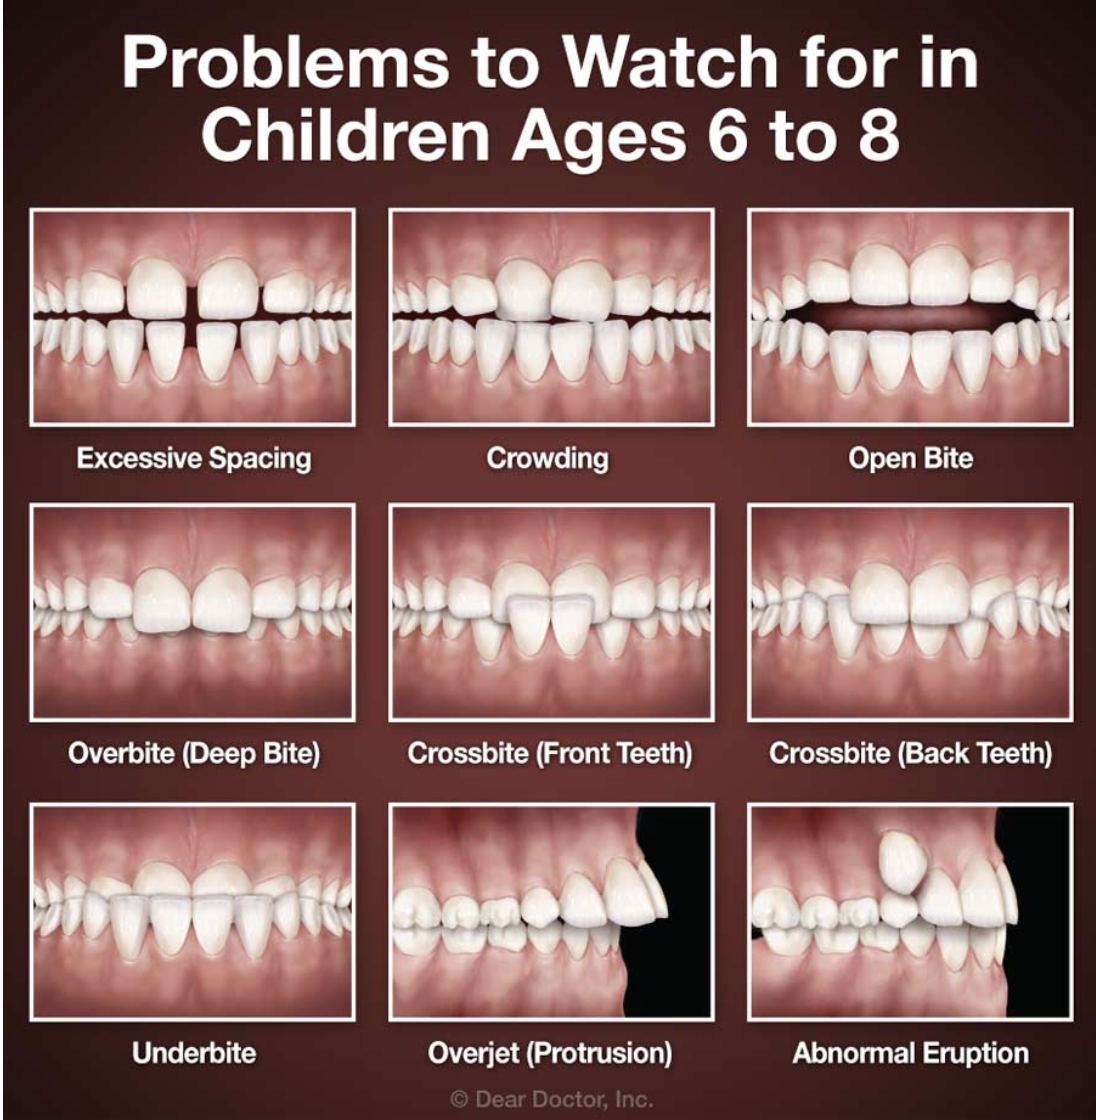 Tooth photos showing &quot;Problems to Watch for in Children Ages 6 to 8&quot;: excessive spacing, crowding, an open bite, overbite, crossbite, underbite, overjet, and abnormal eruption